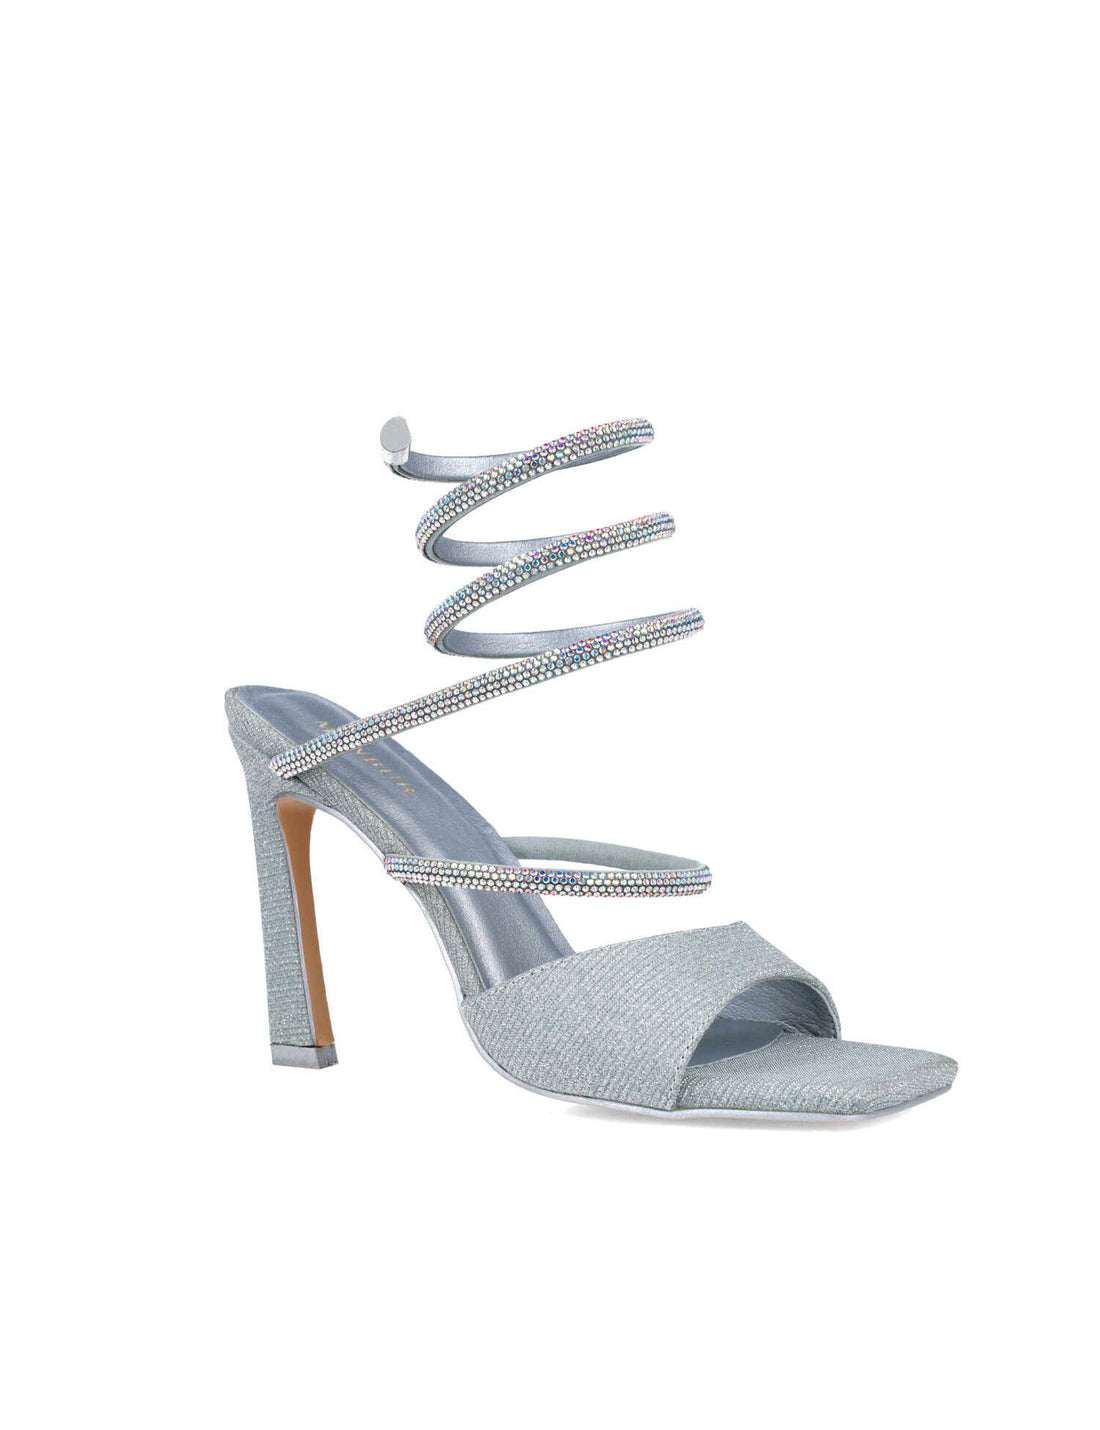 Silver Sandals With Embellished Wrap Strap_24712_09_02